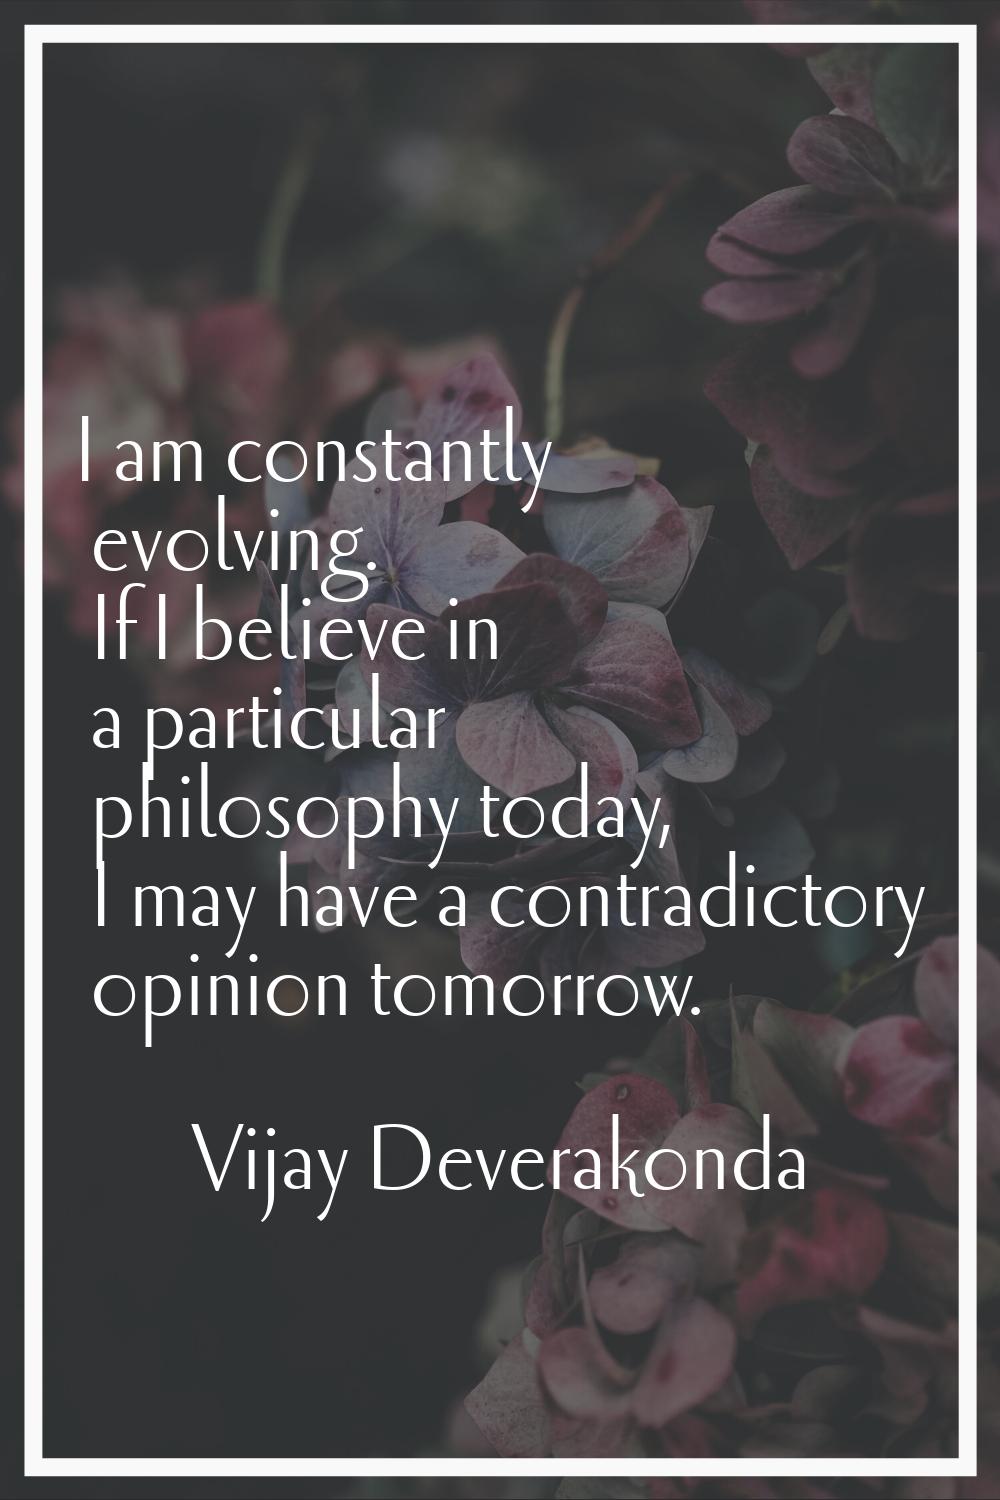 I am constantly evolving. If I believe in a particular philosophy today, I may have a contradictory